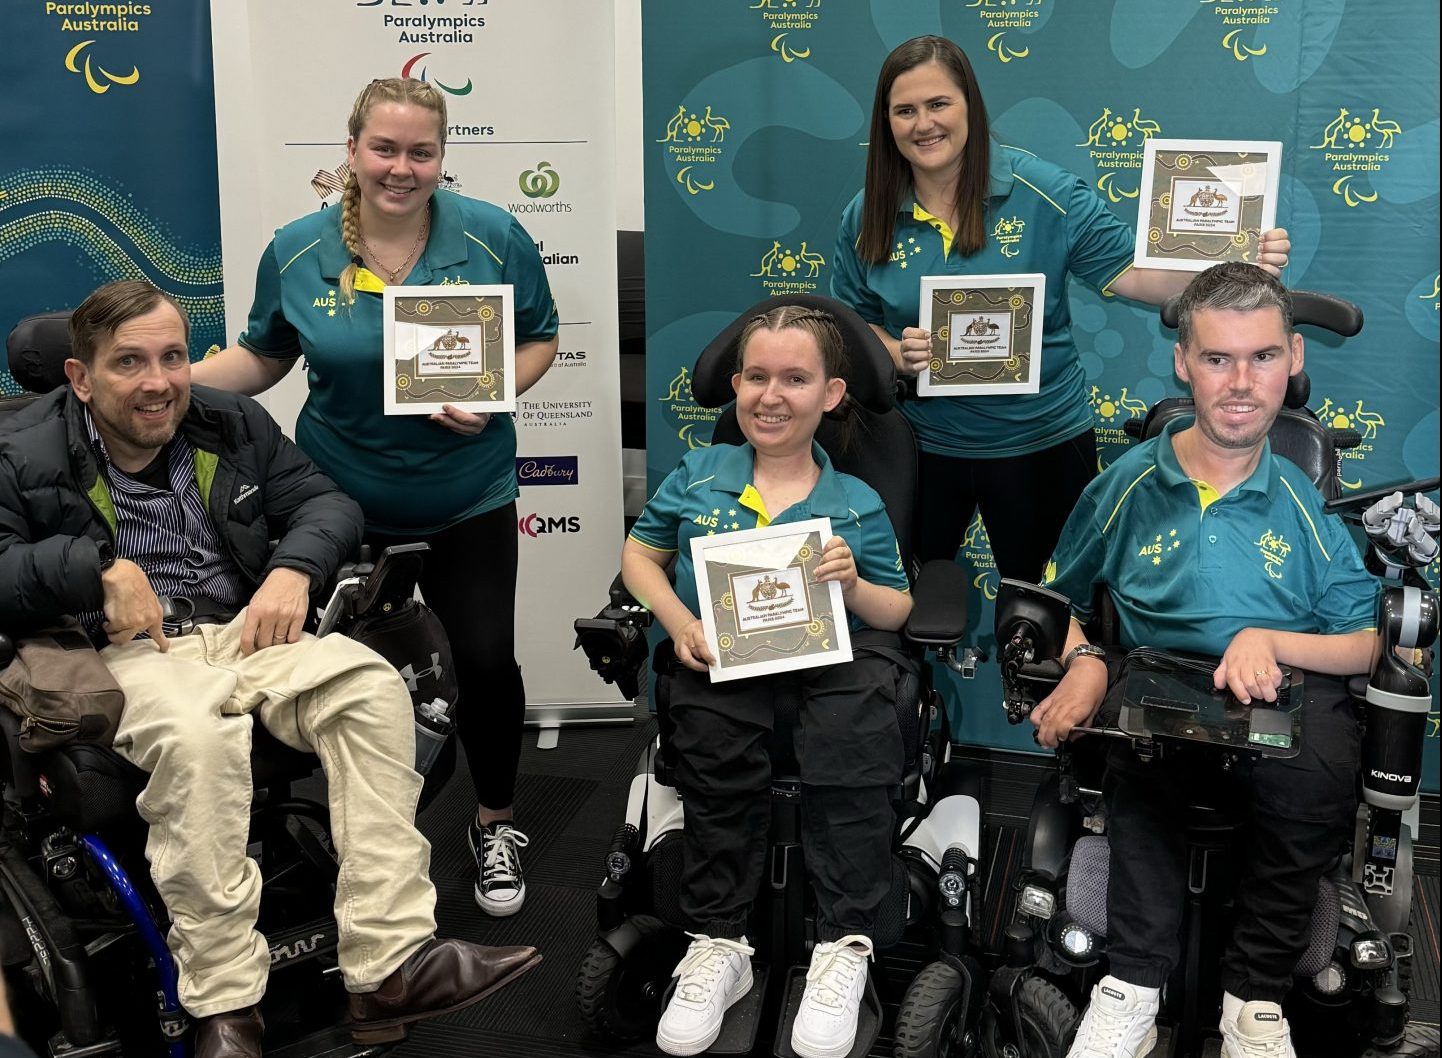 Dan Michel with ramp operator Ashlee Maddern & Jamieson Leeson with ramp operator Jasmine Haydon were named in our Paralympic team today. All 4 athletes are NSWIS Scholarship holders in the Individual Athlete Program.